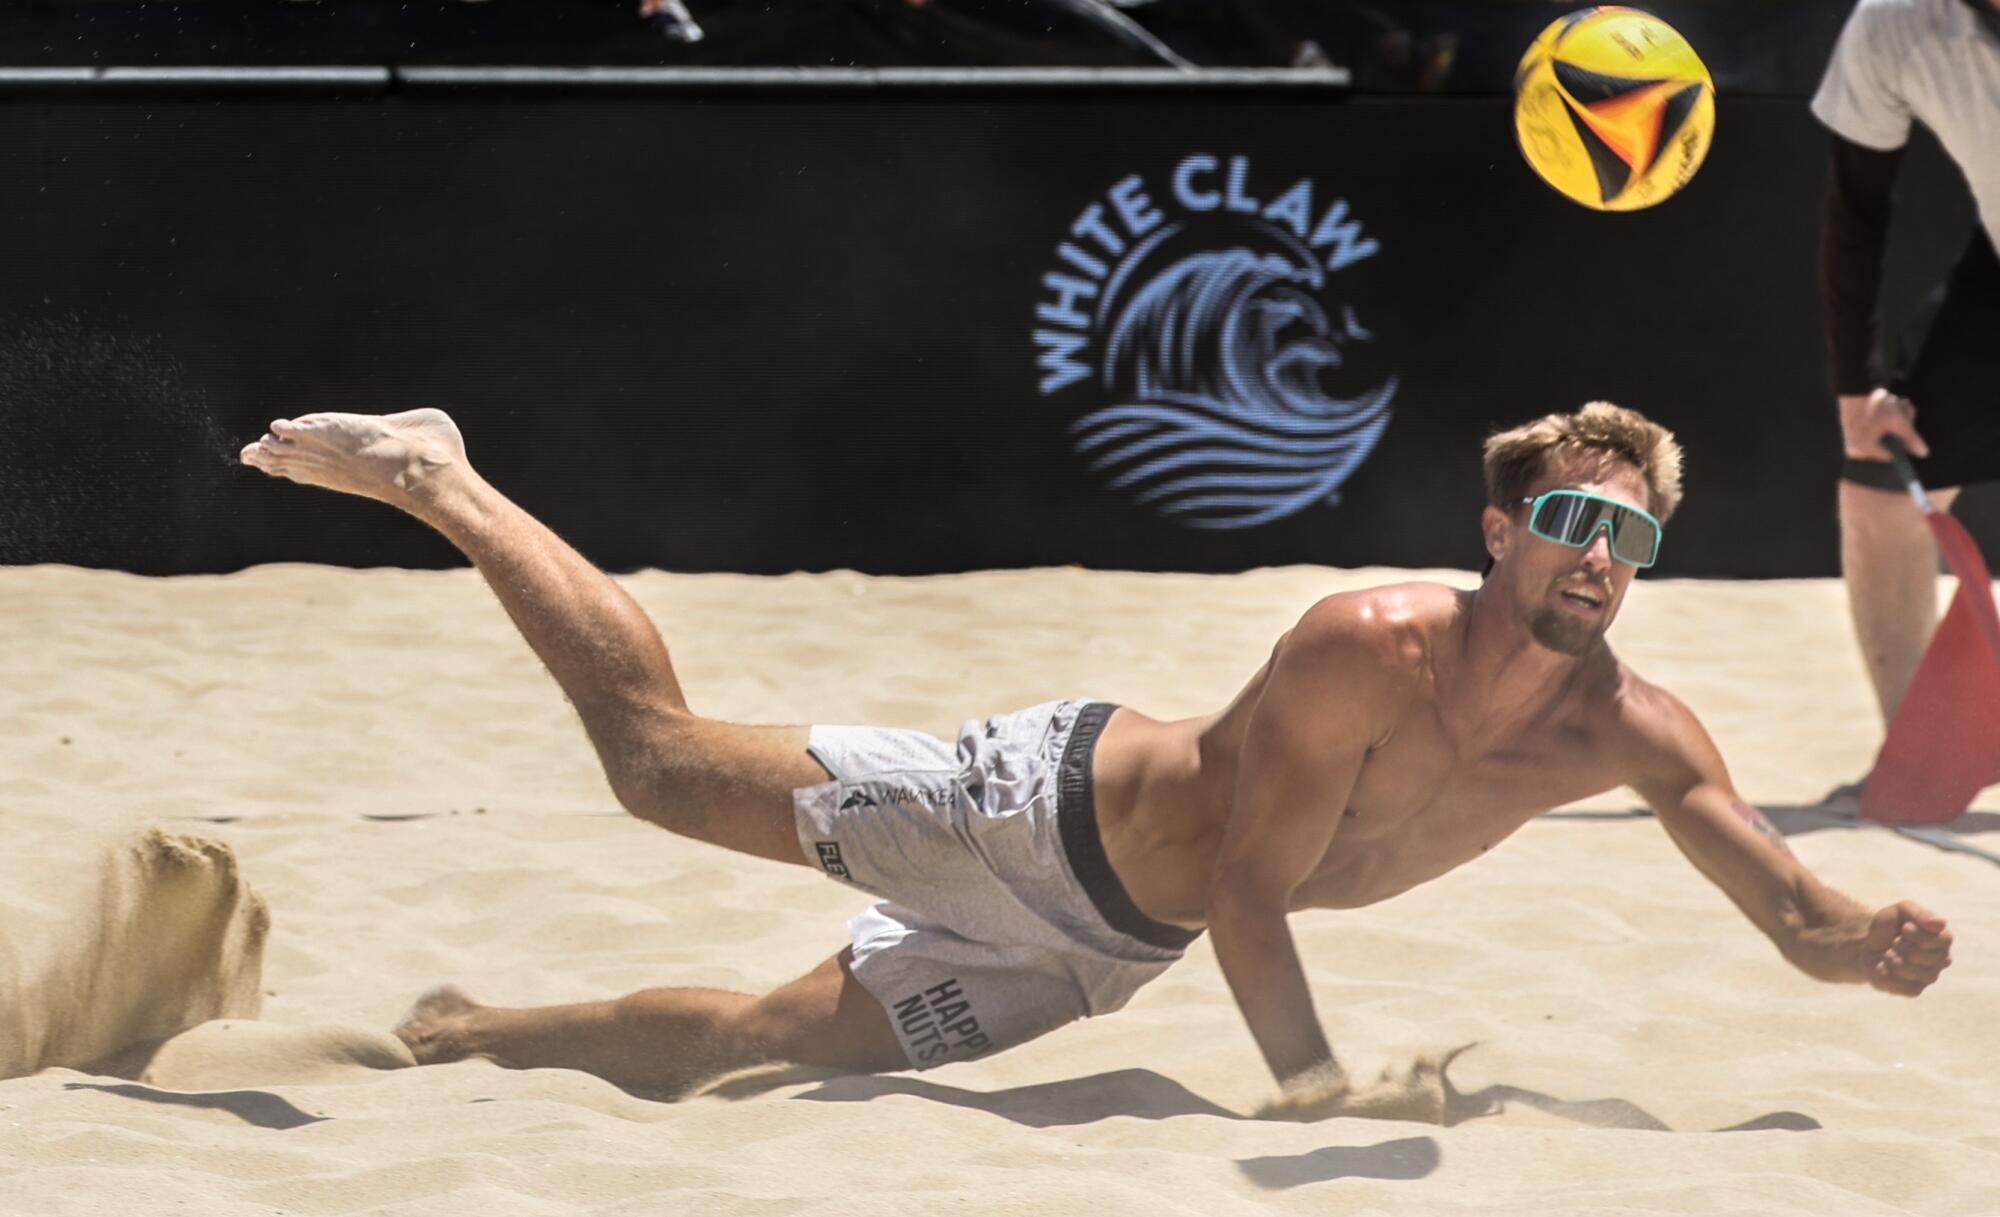 Taylor Crabb dives for a save during a match at the AVP Hermosa Beach Open.